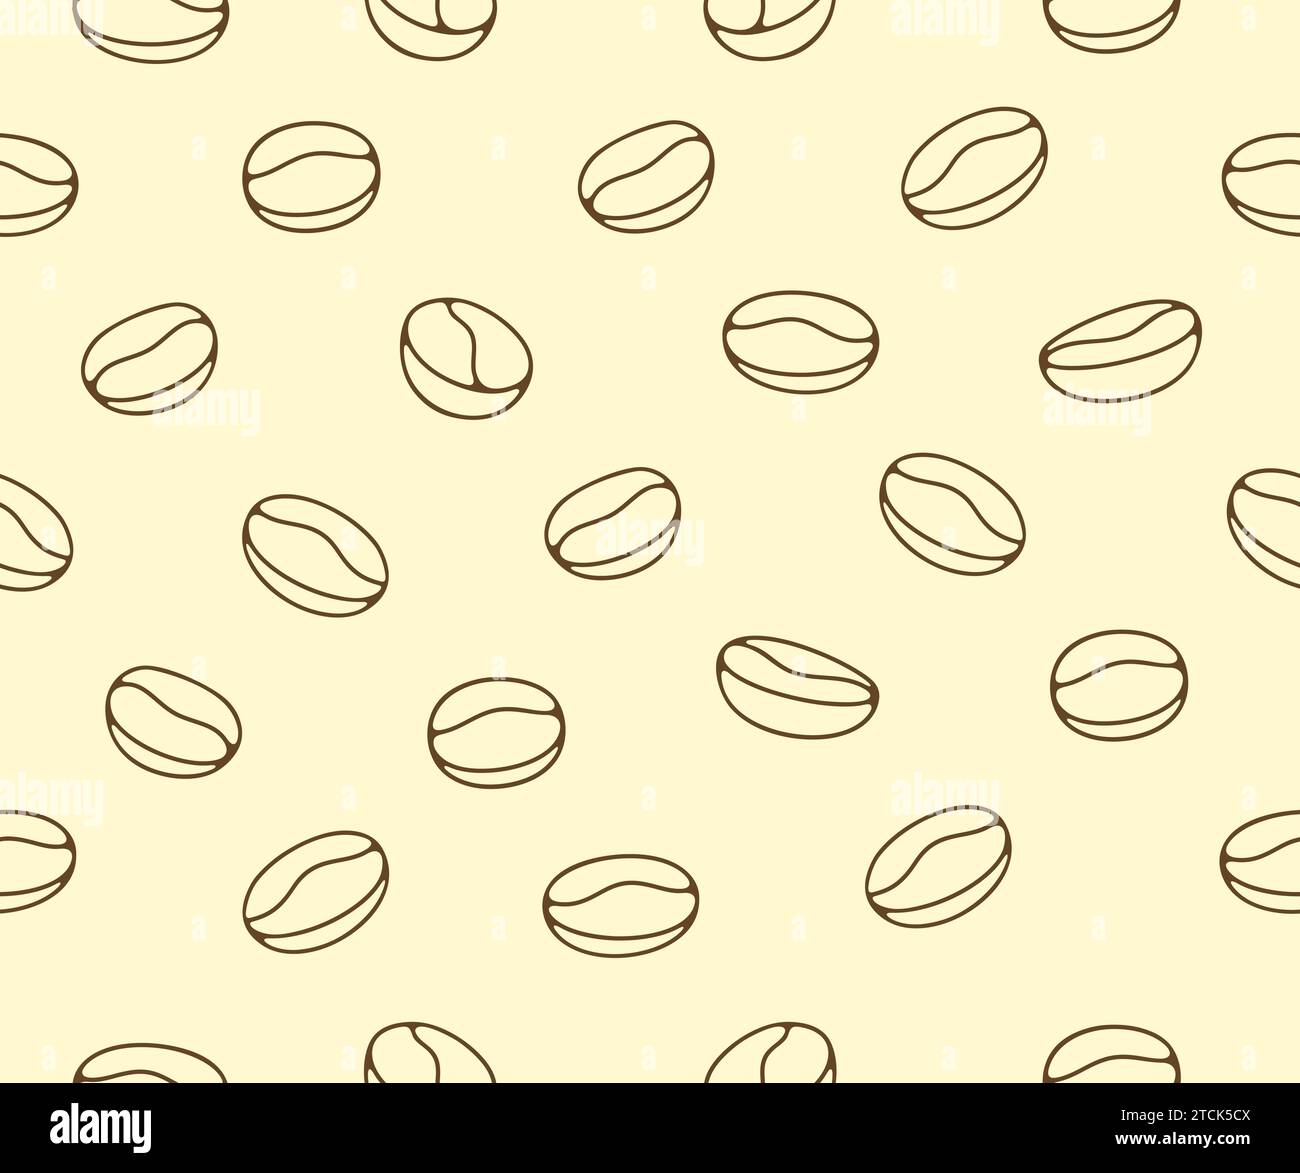 Coffee beans, plant and nature, seamless vector background and pattern. Food, hot drink, beverage, cafes, coffee house and coffee shop, vector design Stock Vector